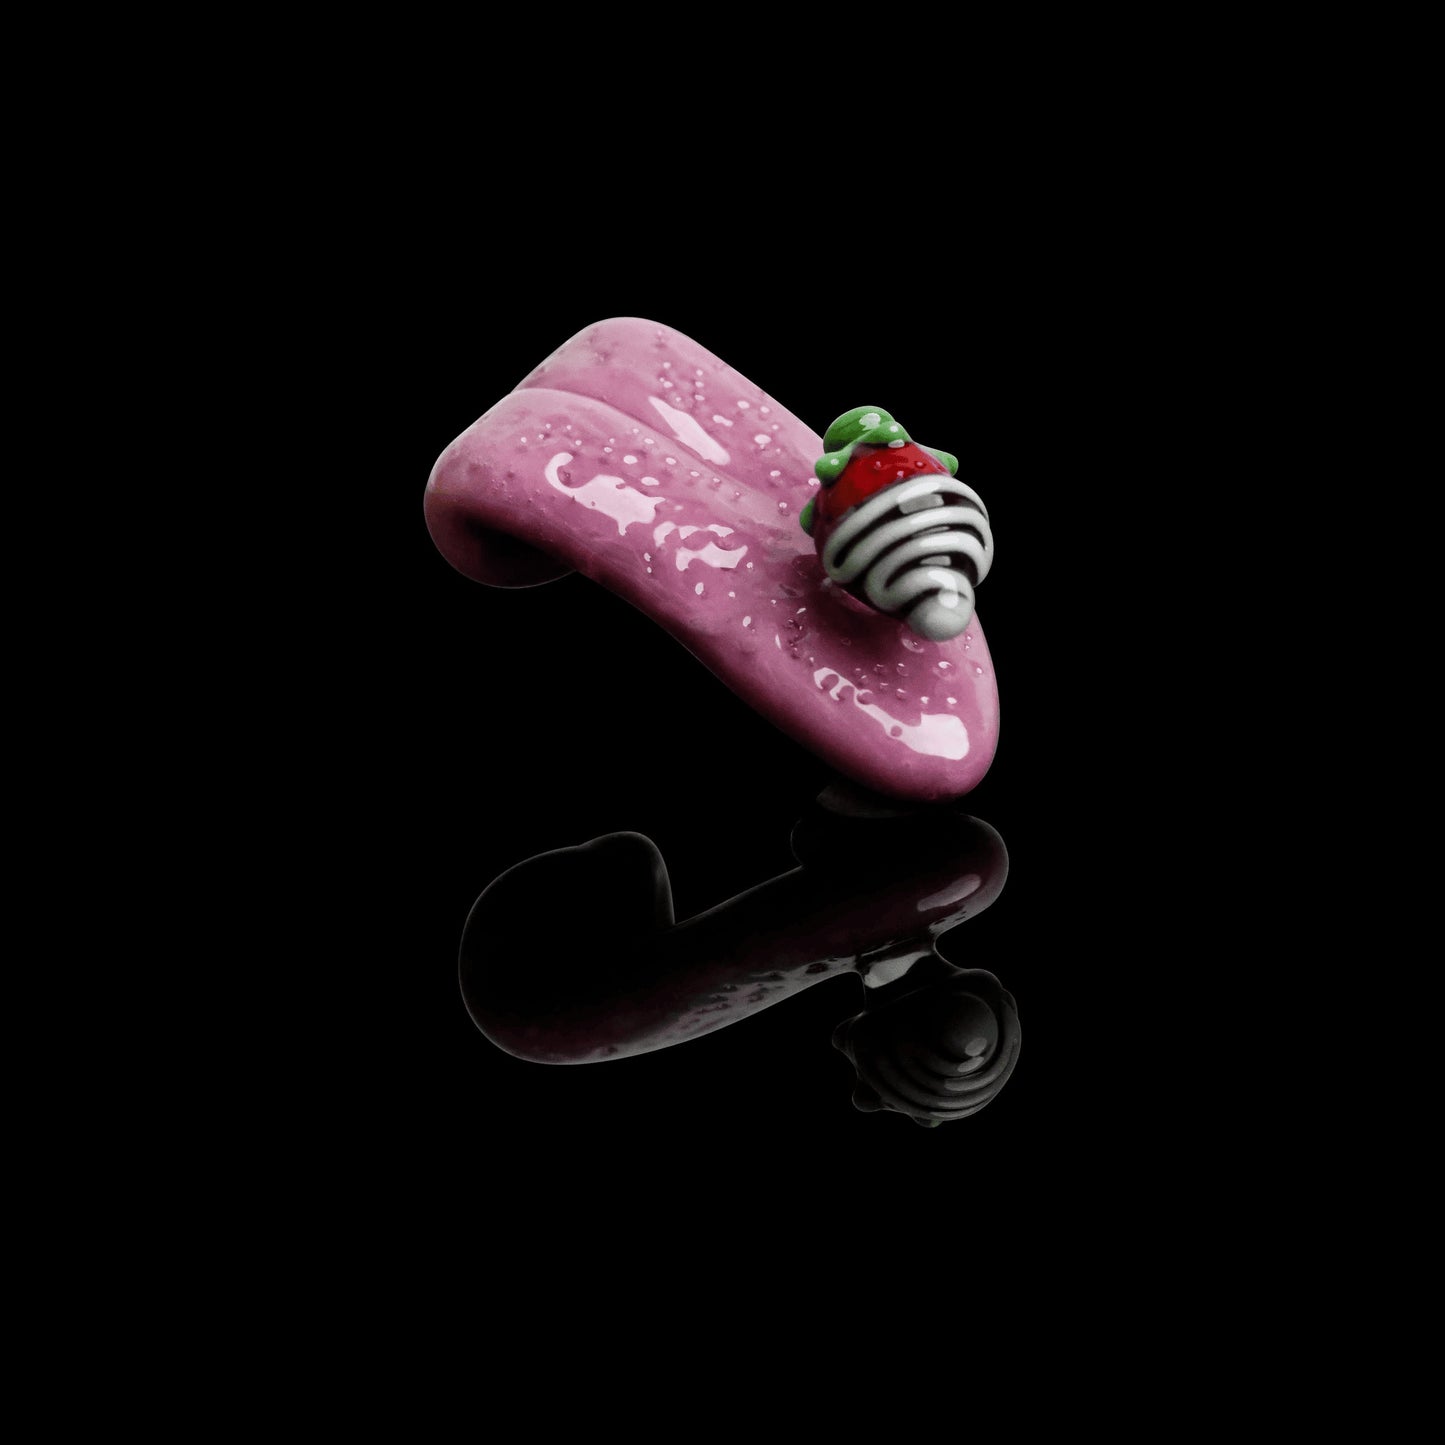 meticulously crafted glass pendant - Chocolate Strawberry Tongue Collab Pendant (A) by Gnarla Carla x Ryder Glass (2022 Drop)